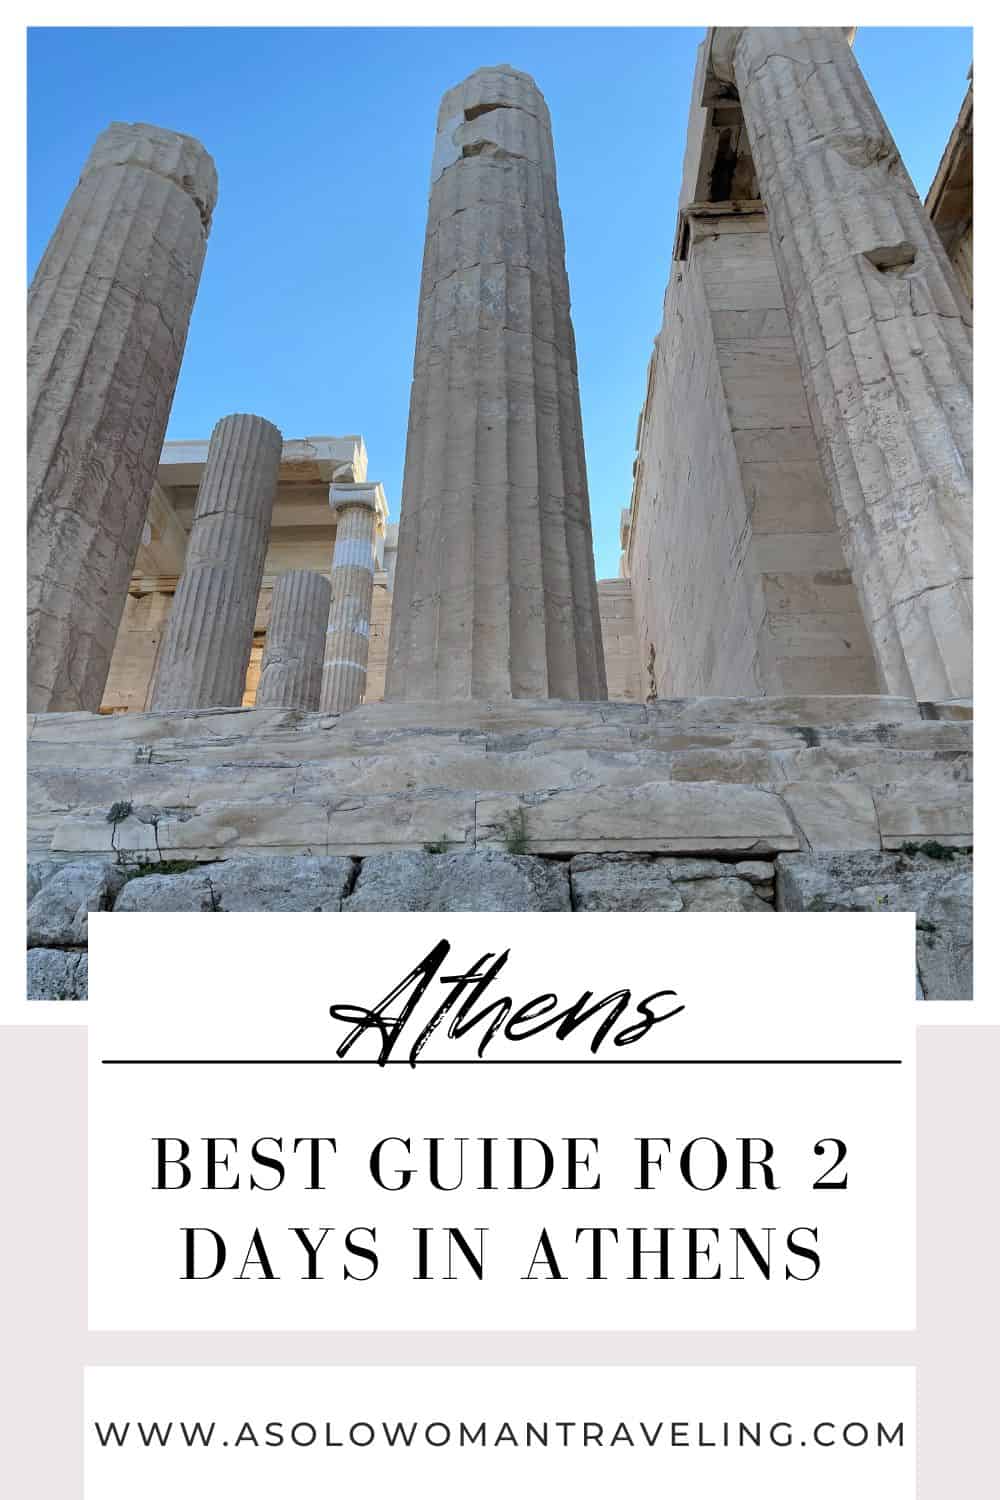 Athens - Best 2 Days in Greece